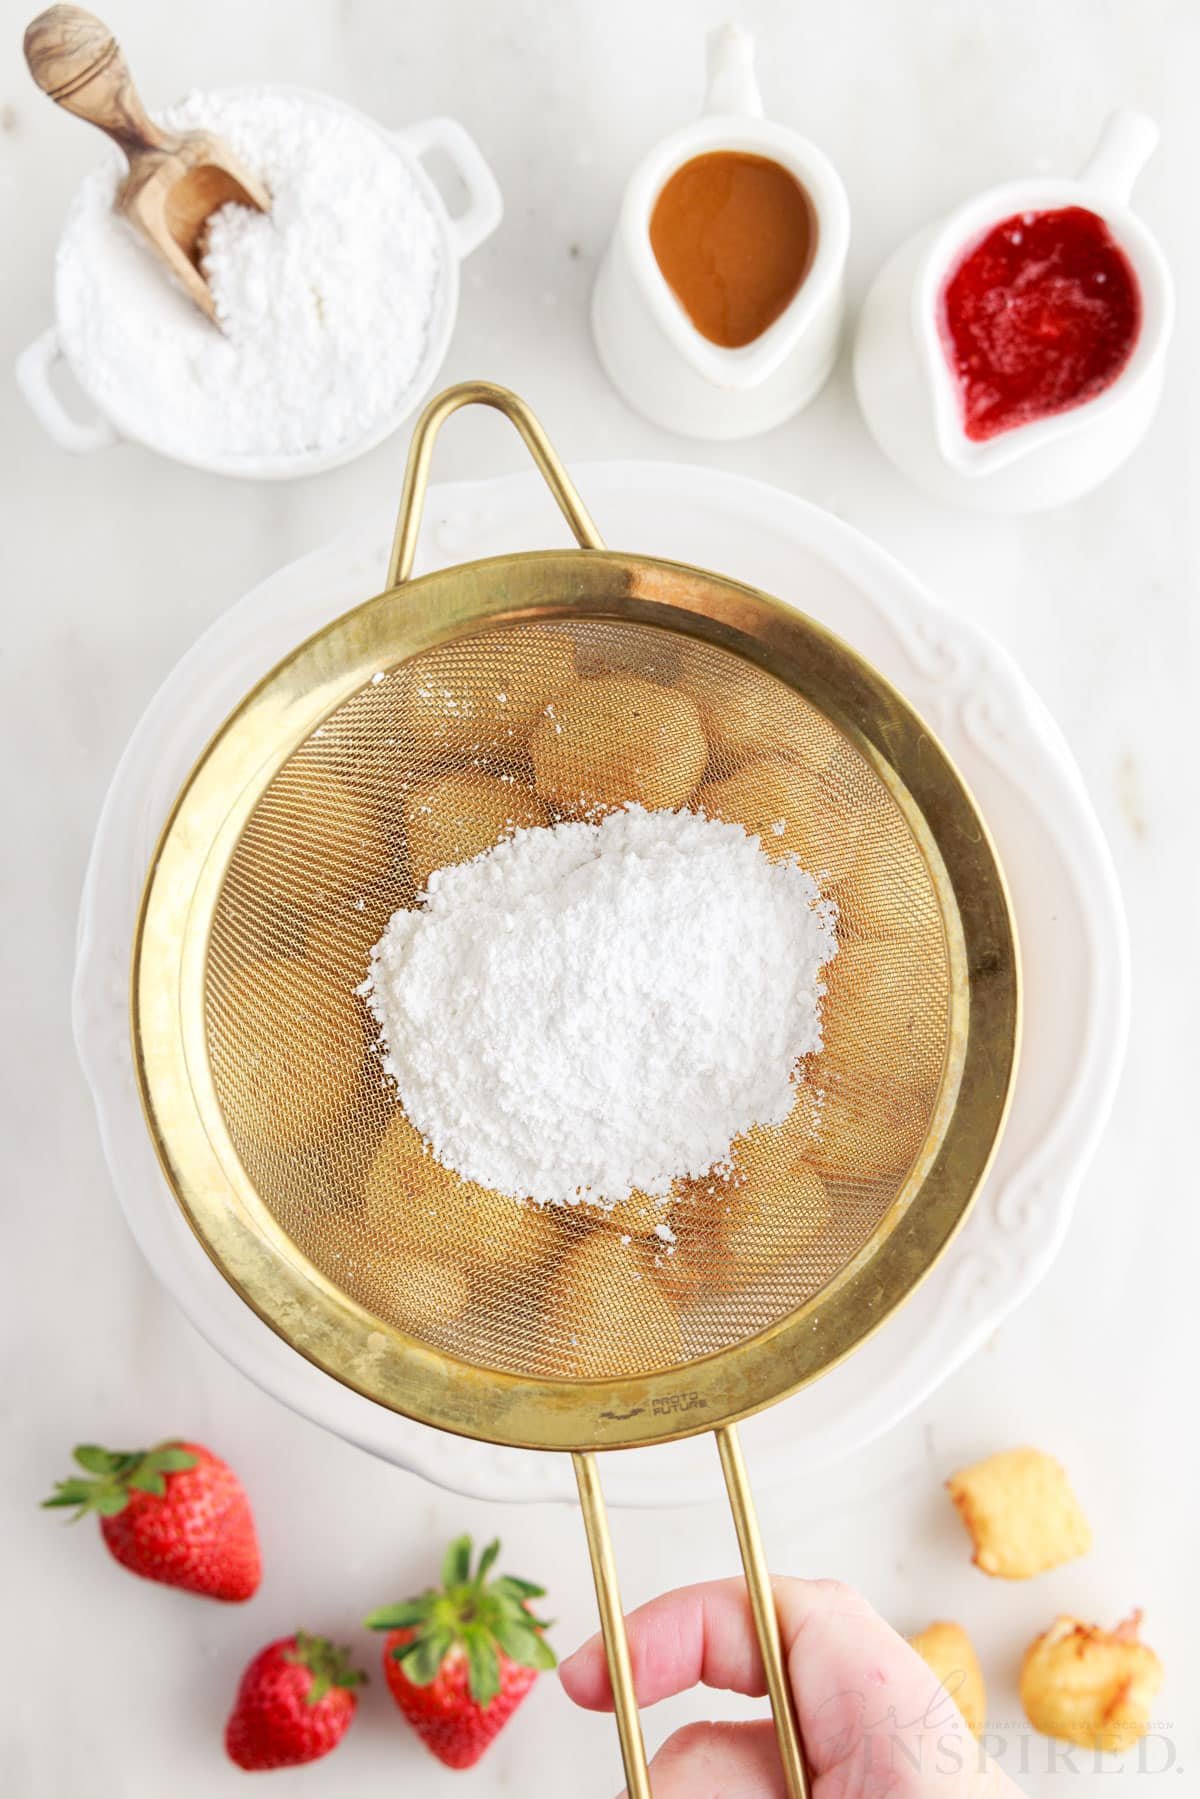 Powdered sugar in sifter over bowl of fried cheesecake bites.